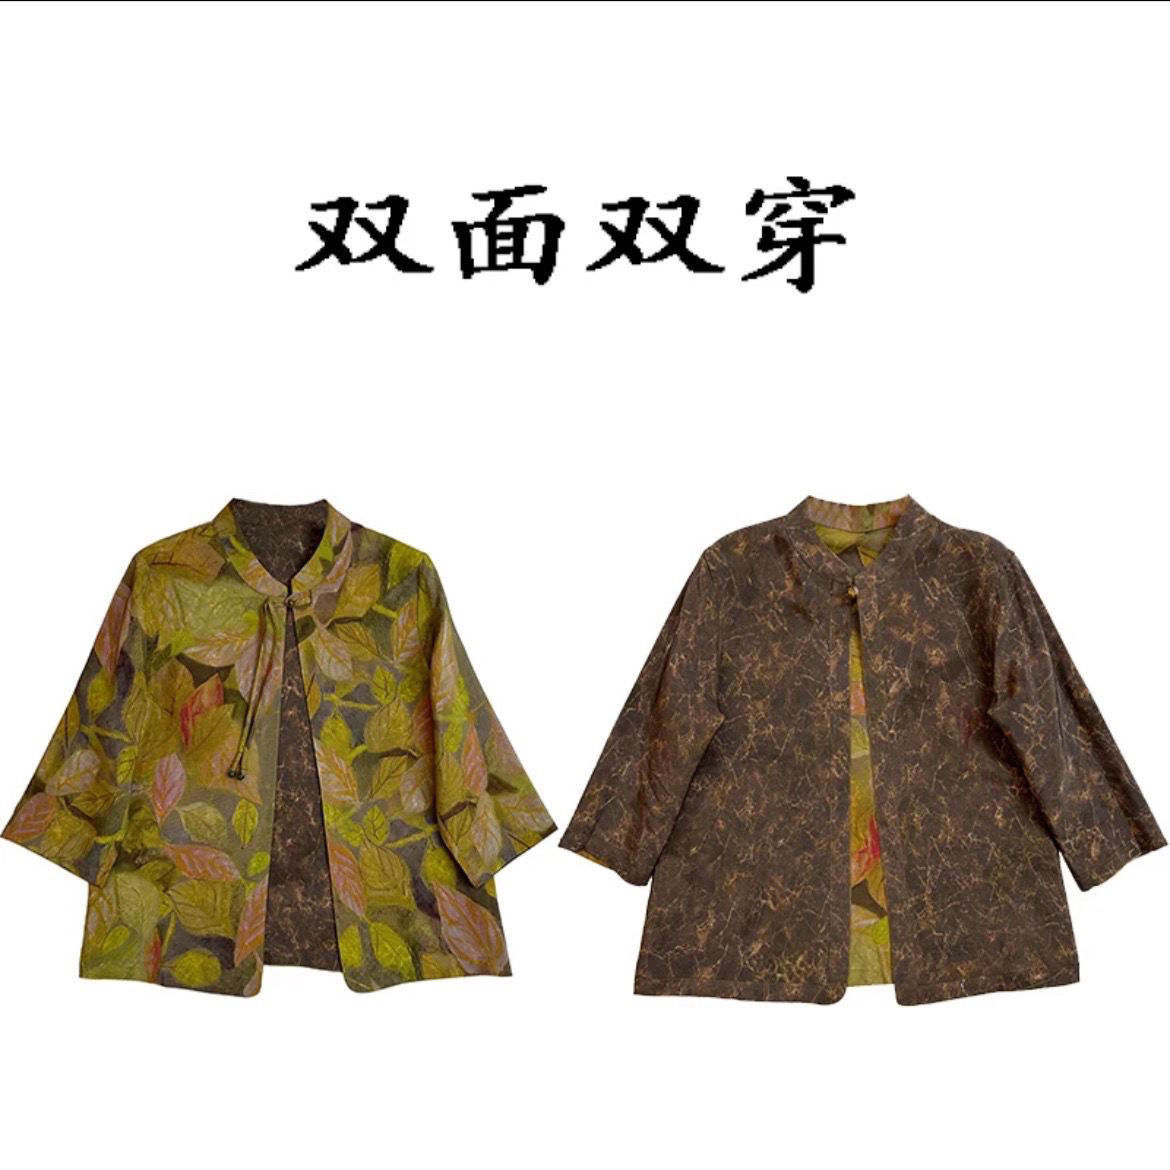  Xiangyun yarn cardigan female high-end temperament middle-aged and elderly mother fashion small shirt large size belly cover top